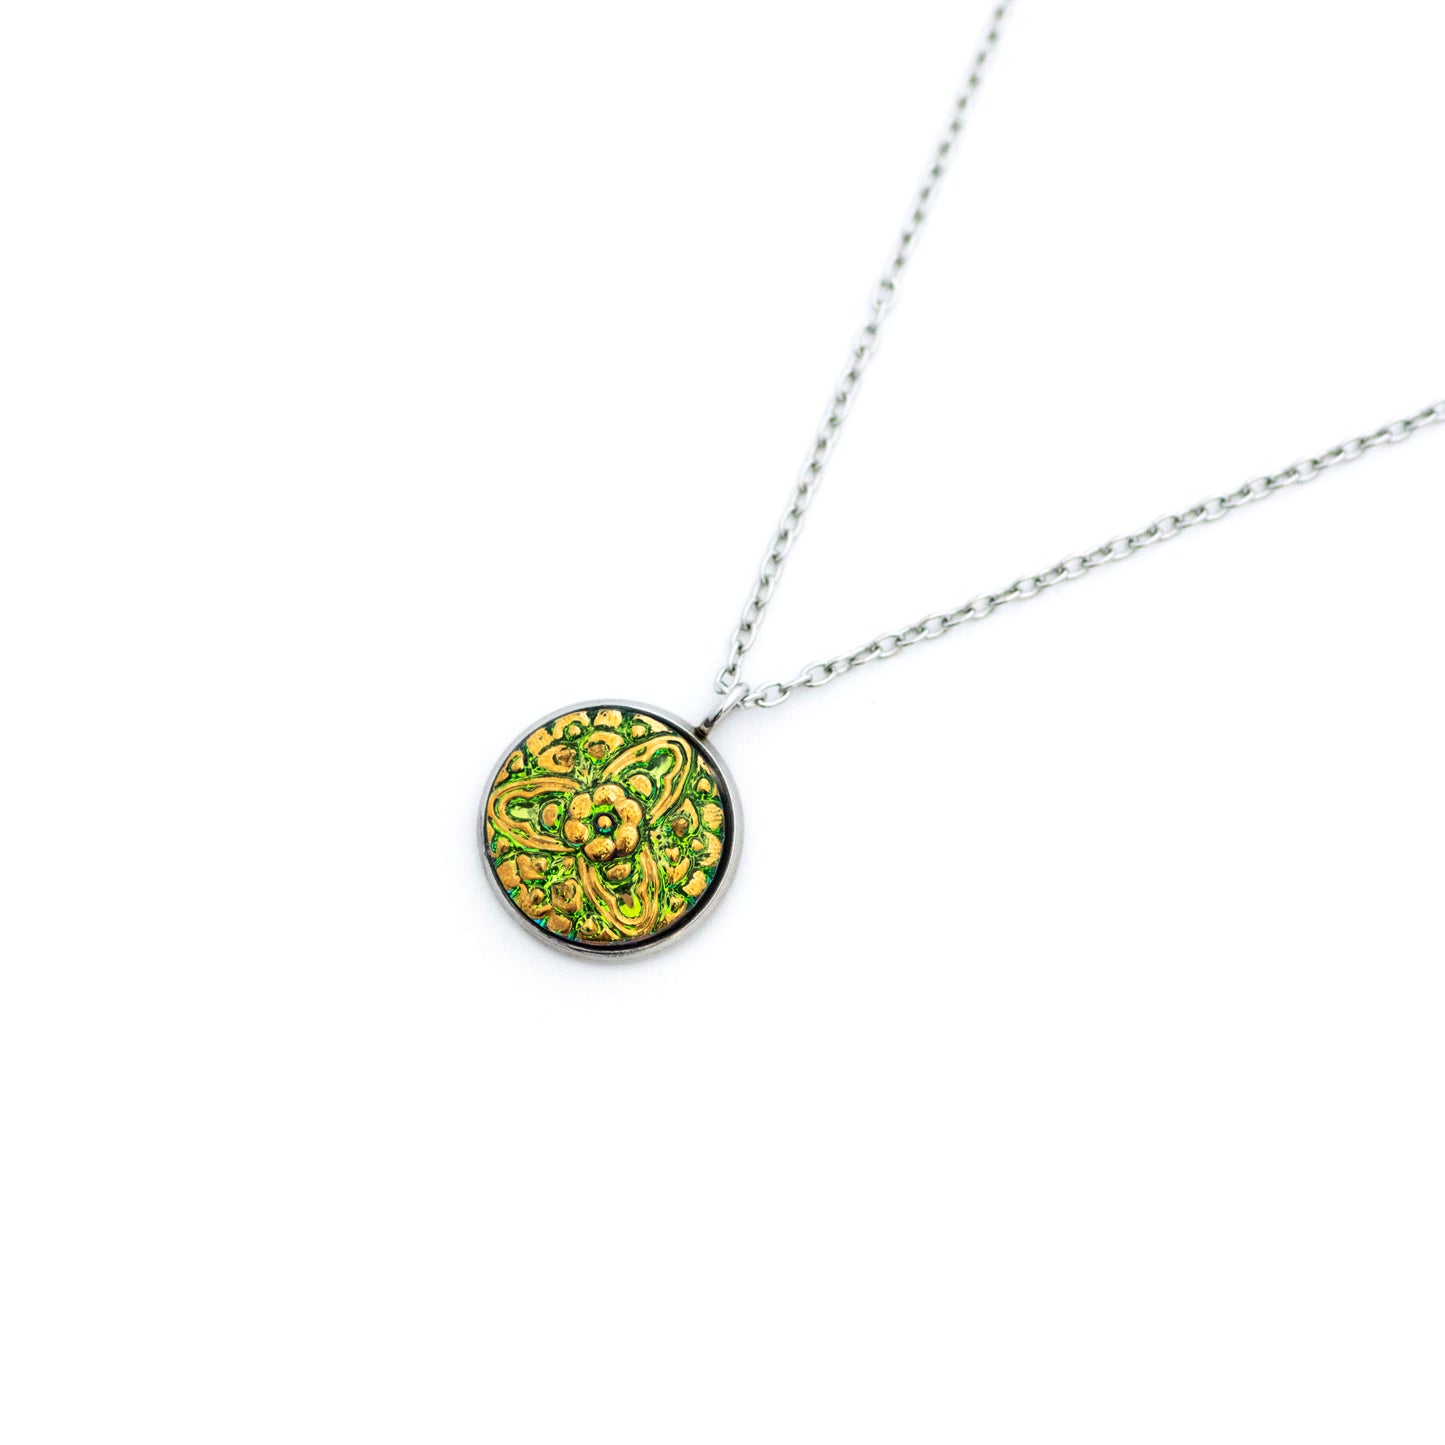 Green and gold painted Czech glass button with 3 point floral motif. Button pendant necklace.